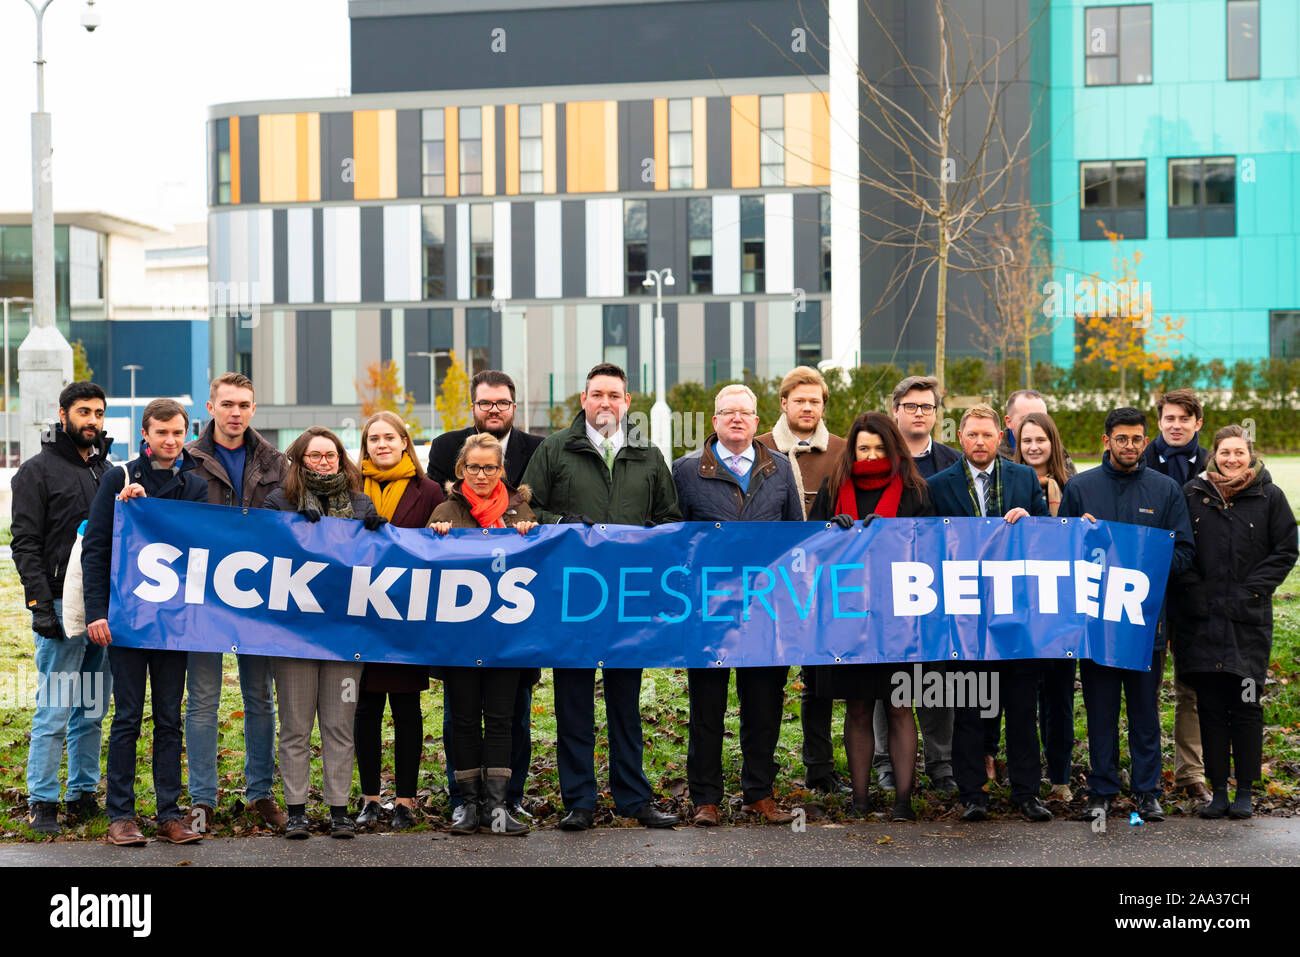 Edinburgh, Scotland, UK. 19th November 2019. Scottish Conservatives unveil banner outside the new unfinished and much-delayed Royal Hospital for Children and Young People in Edinburgh. Shadow health secretary Miles Briggs, accompanied by Jackson Carlaw MSP,  unveiled banner stating how the nationalists (SNP) have let down young patients and their families not just in Edinburgh, but across the country.19th November 2019. Iain Masterton/Alamy Live News. Credit: Iain Masterton/Alamy Live News Stock Photo